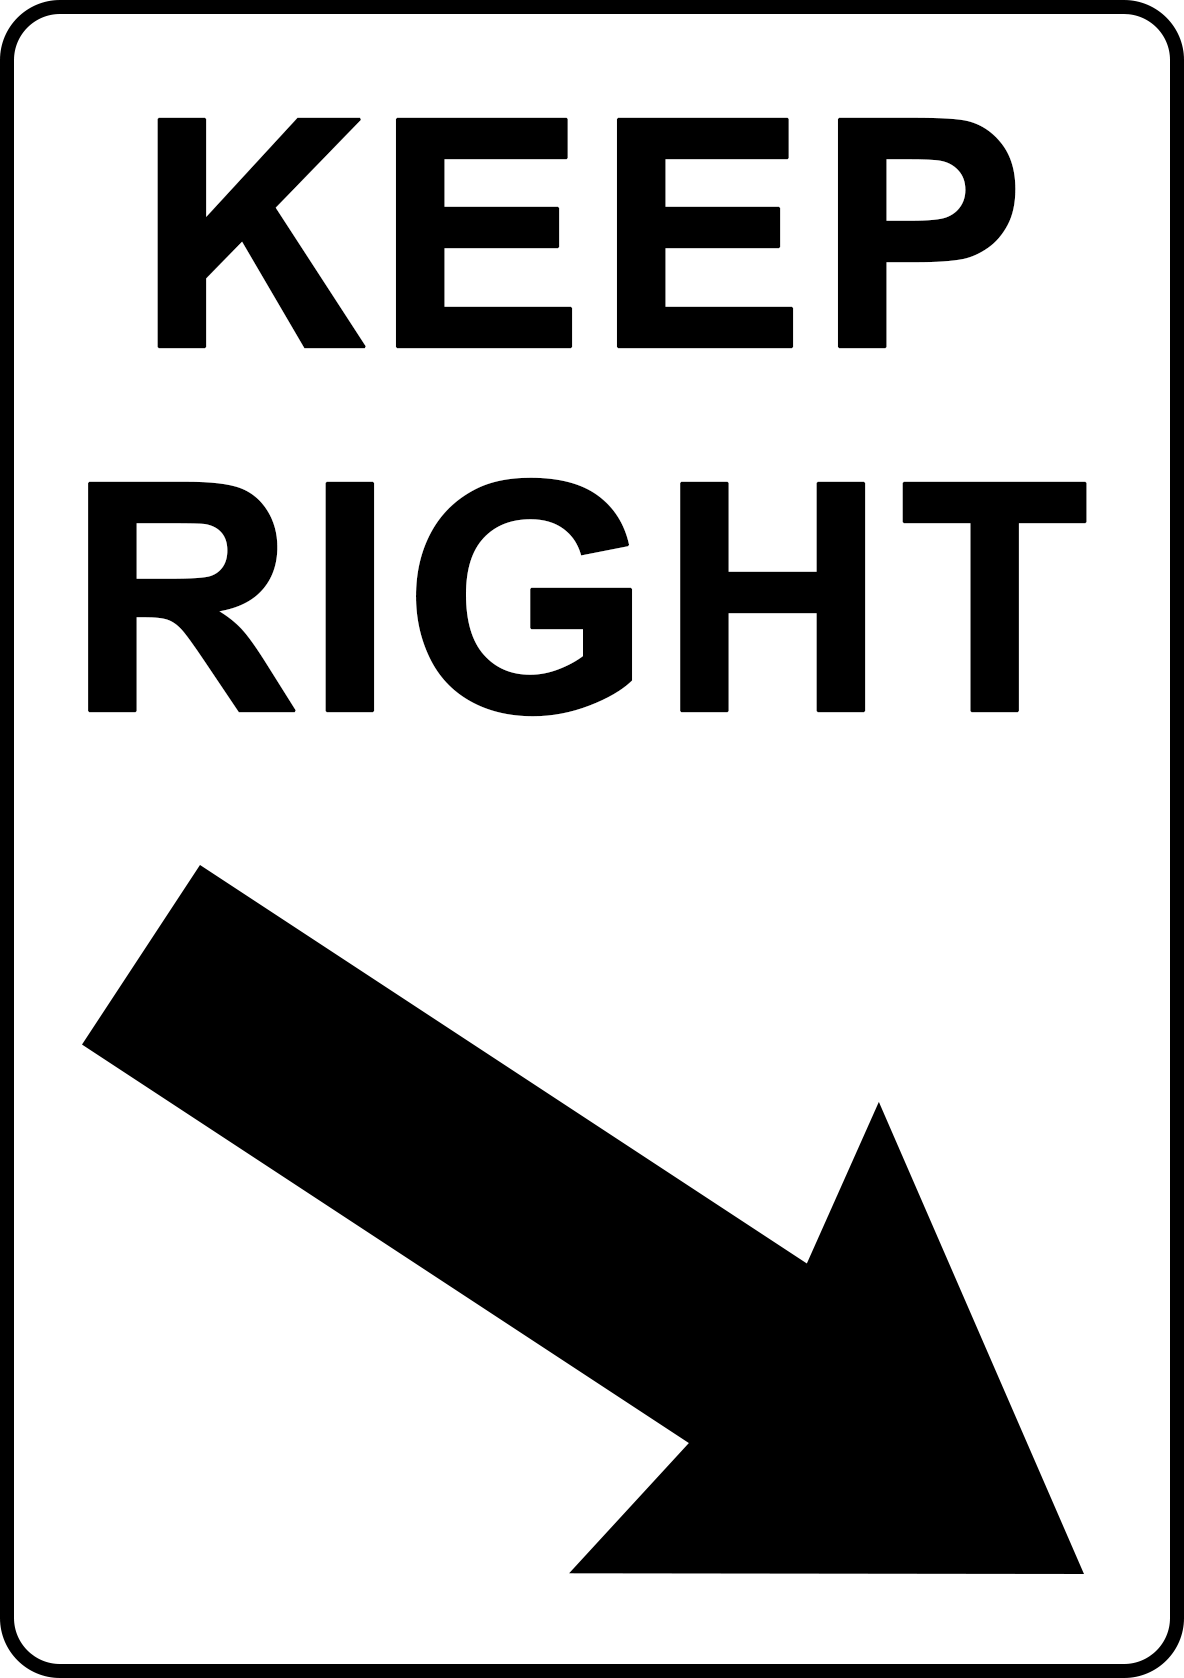 Keep Right Image HQ Image Free PNG PNG Image